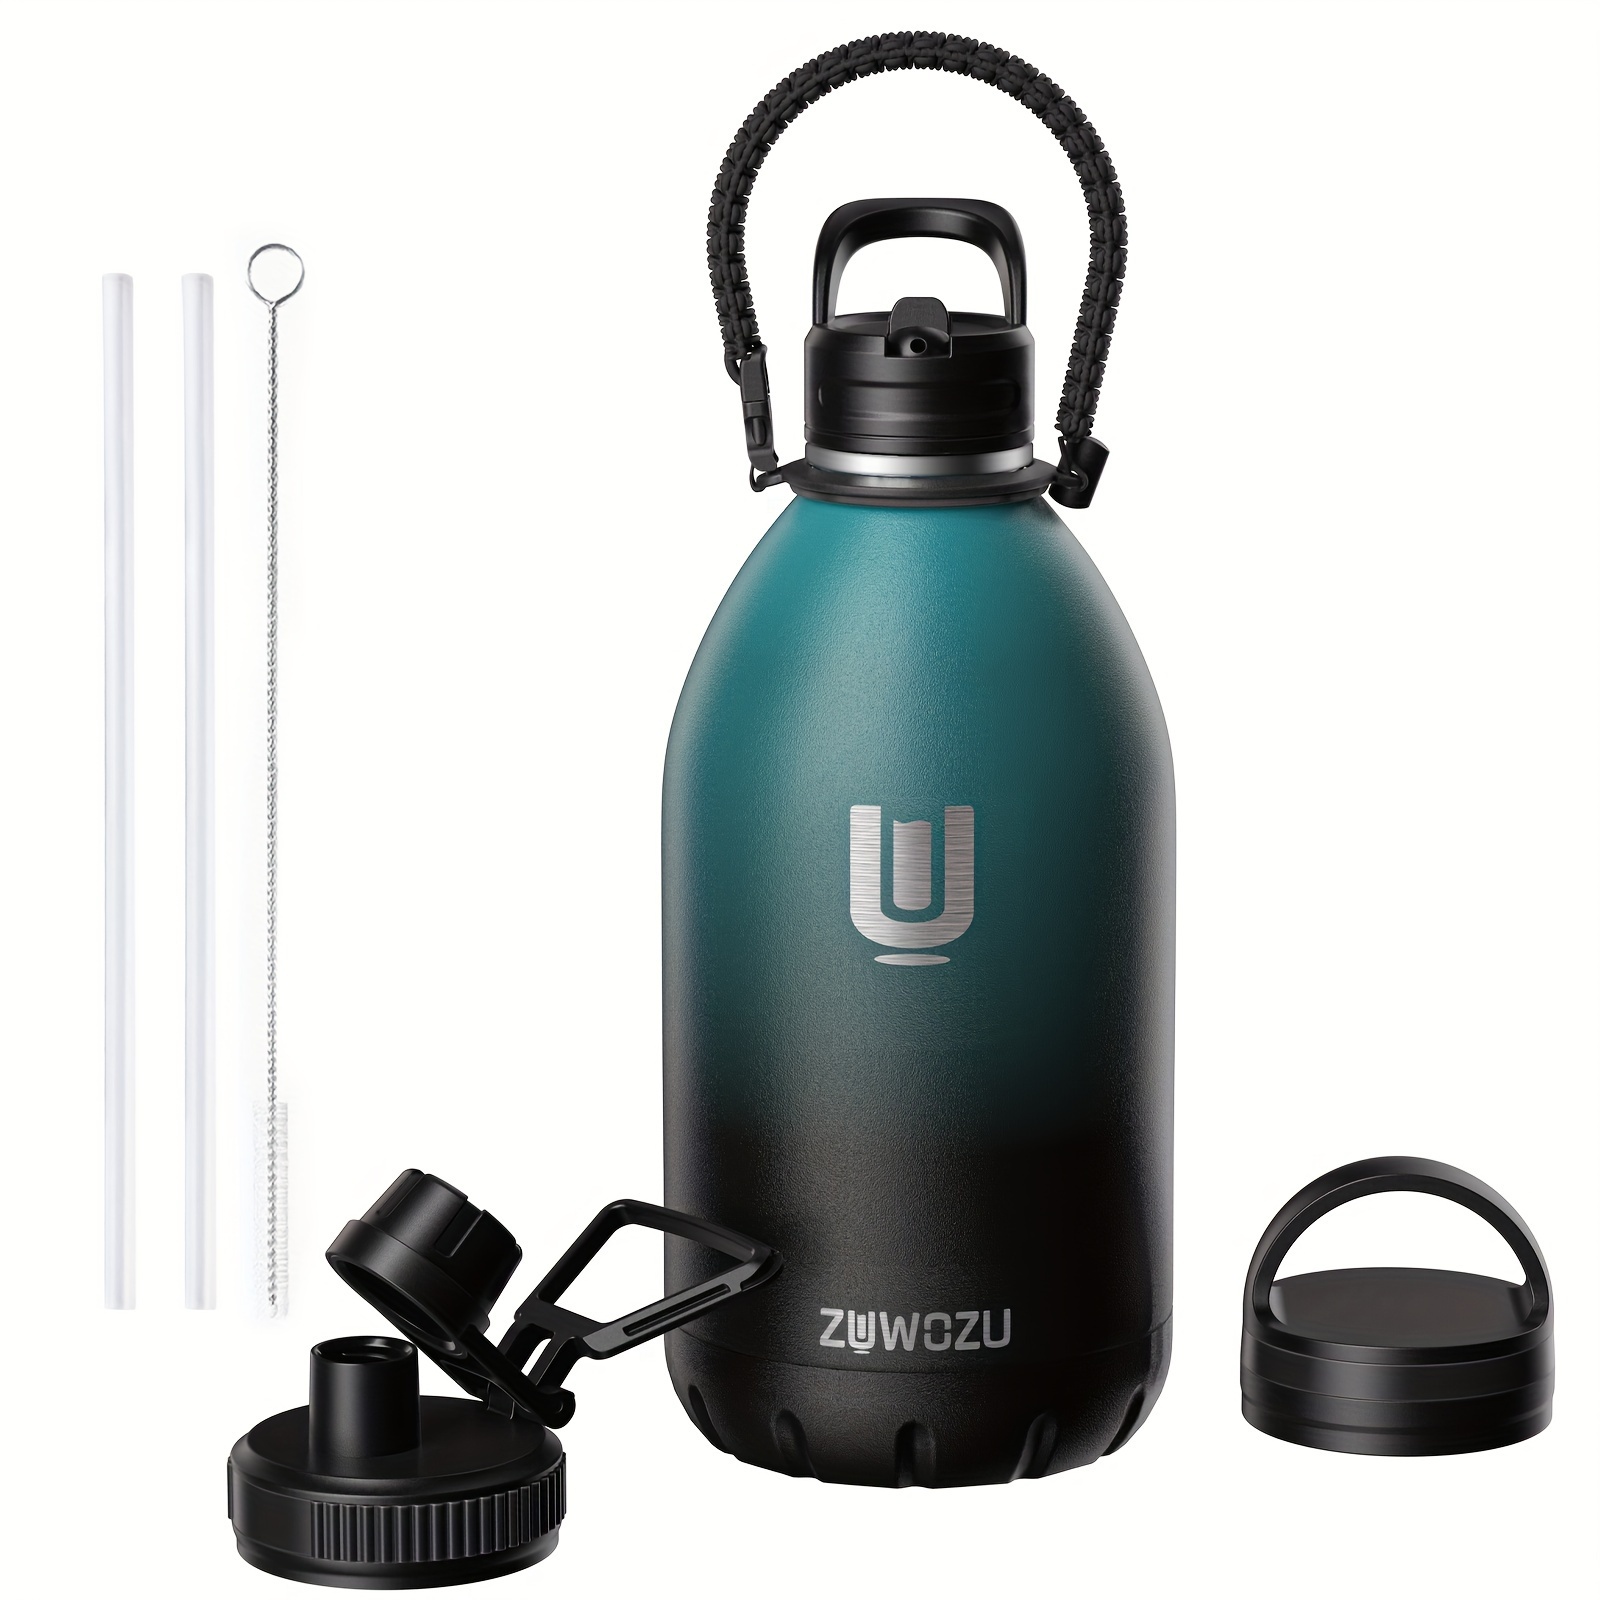 

Zuwozu 1 Gallon Water Bottle Insulated, 128oz Large Stainless Steel Water Bottles With Straw, Strap & 3 Lids, Big Gallon Water Jug For Hot & Cold Drinks, Great For Sports, Gym, Camping,